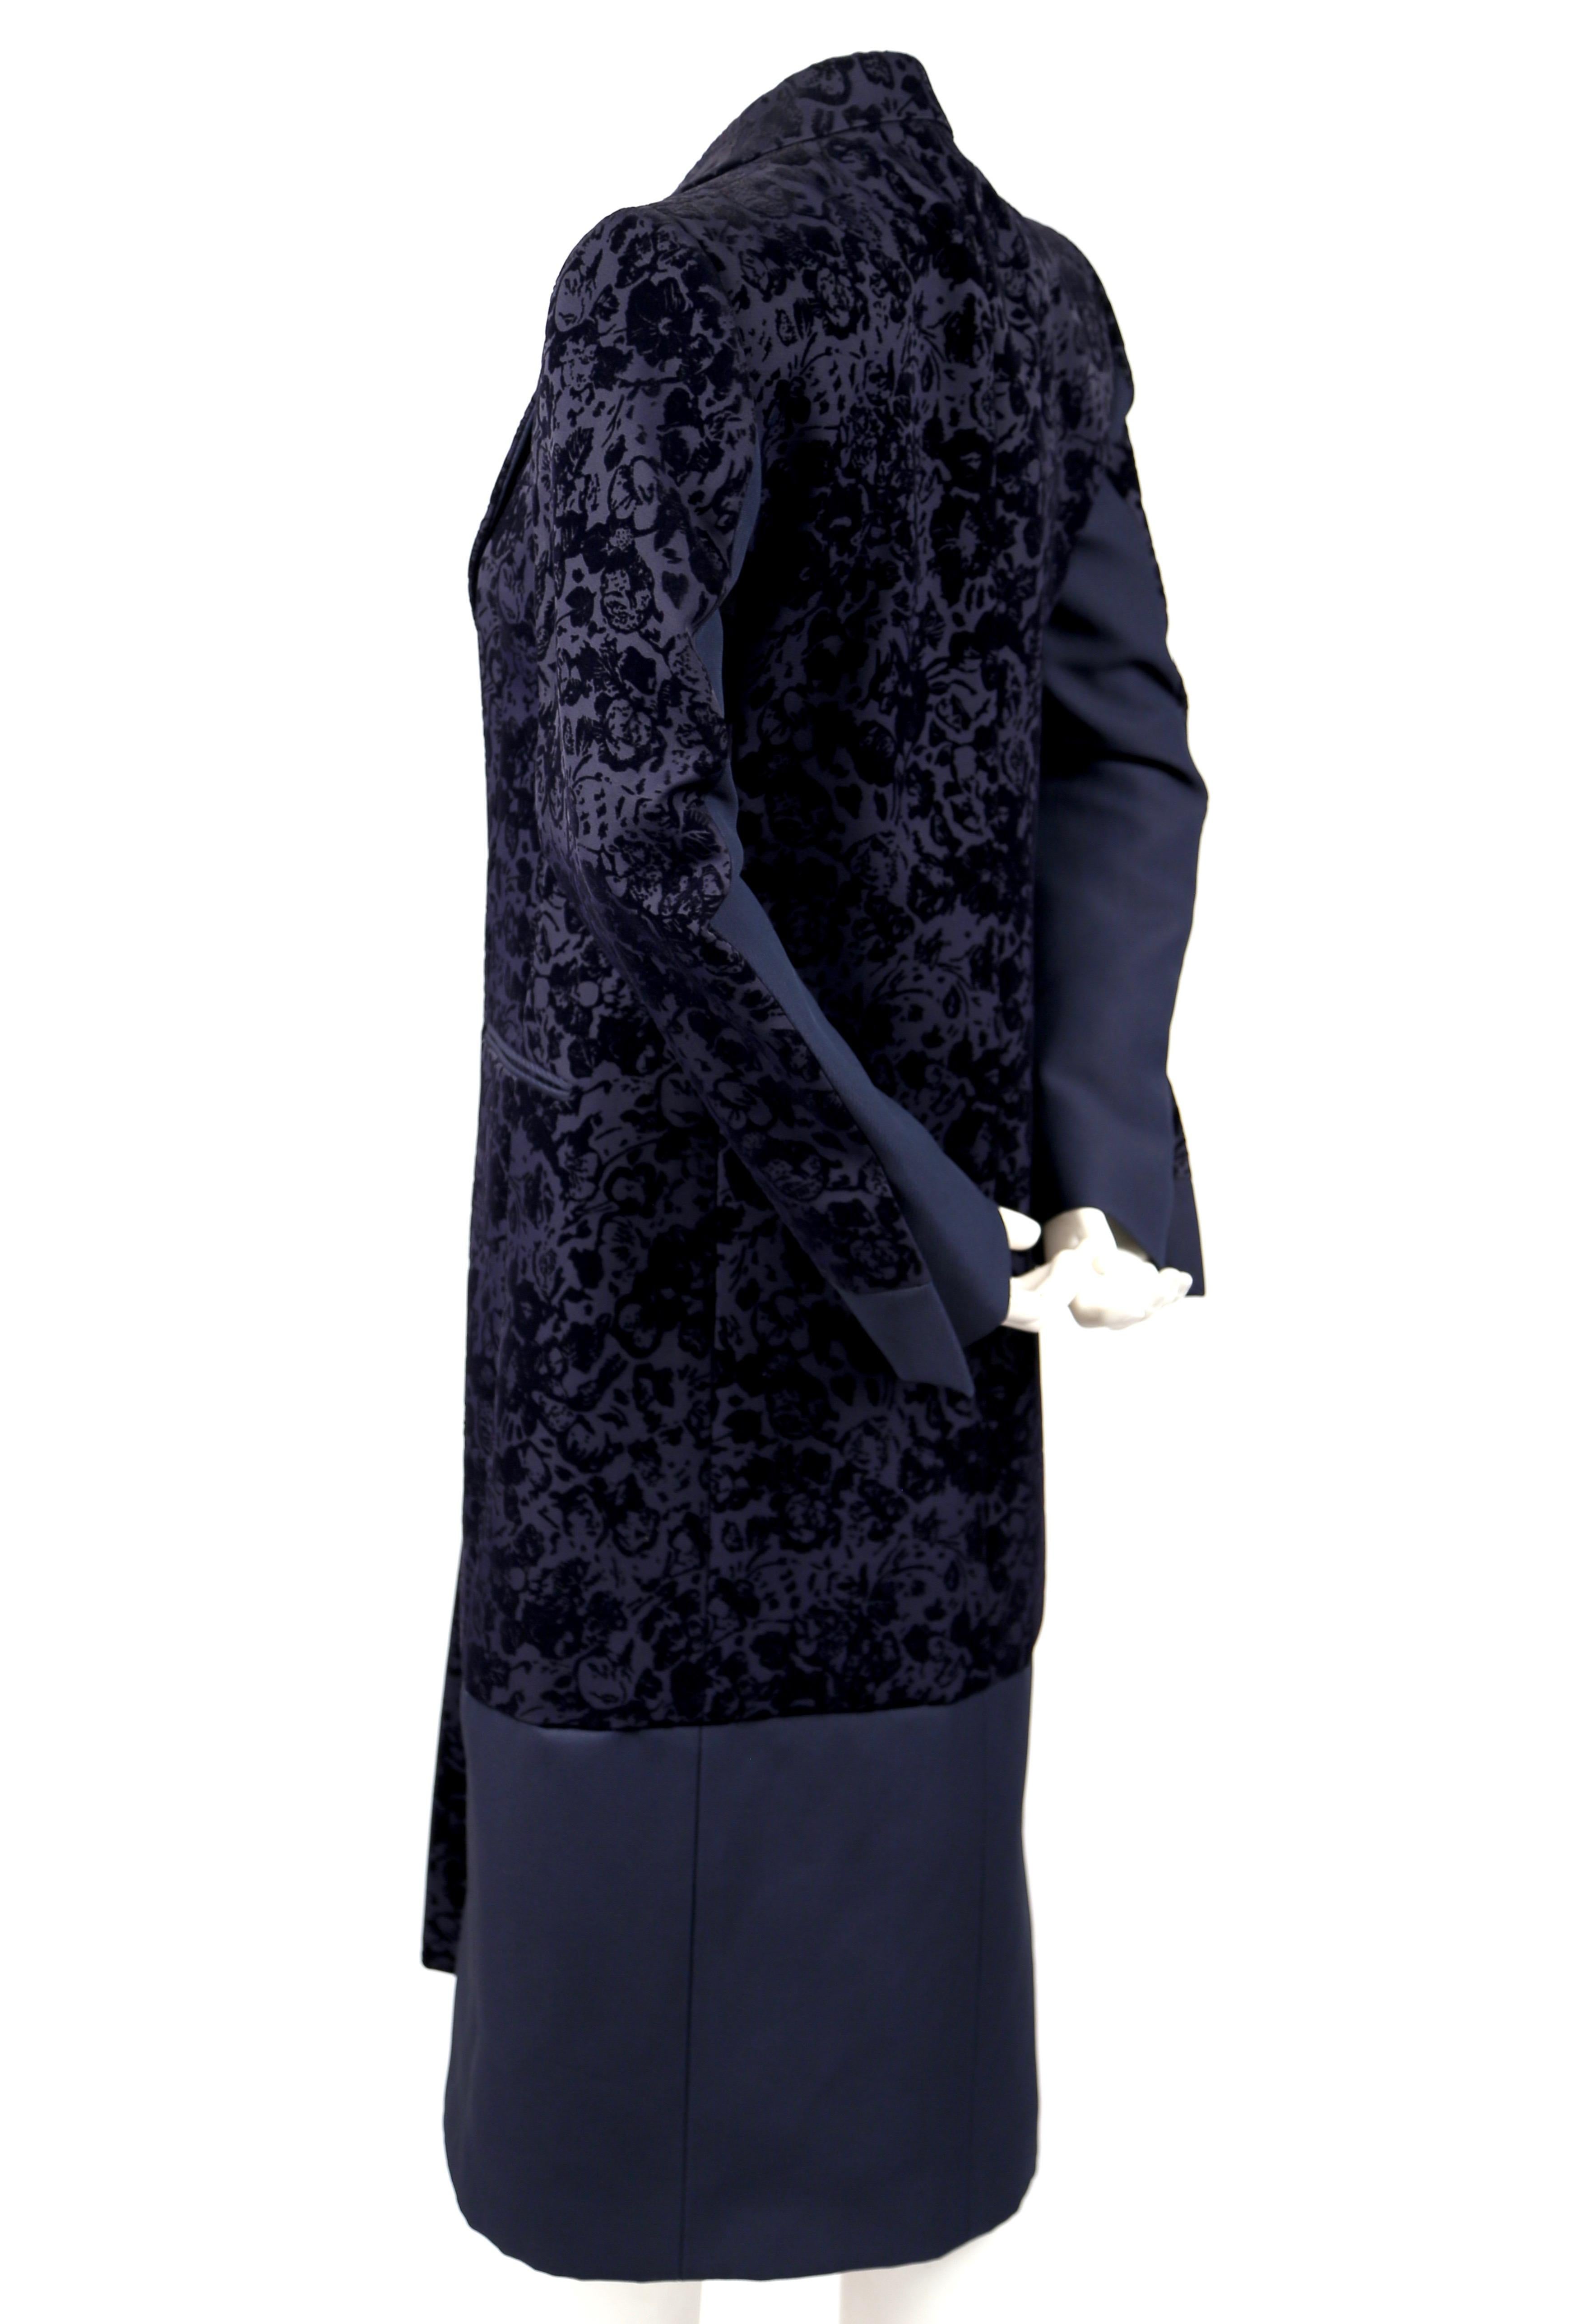 2013 CELINE by PHOEBE PHILO navy floral flocked coat In Excellent Condition In San Fransisco, CA